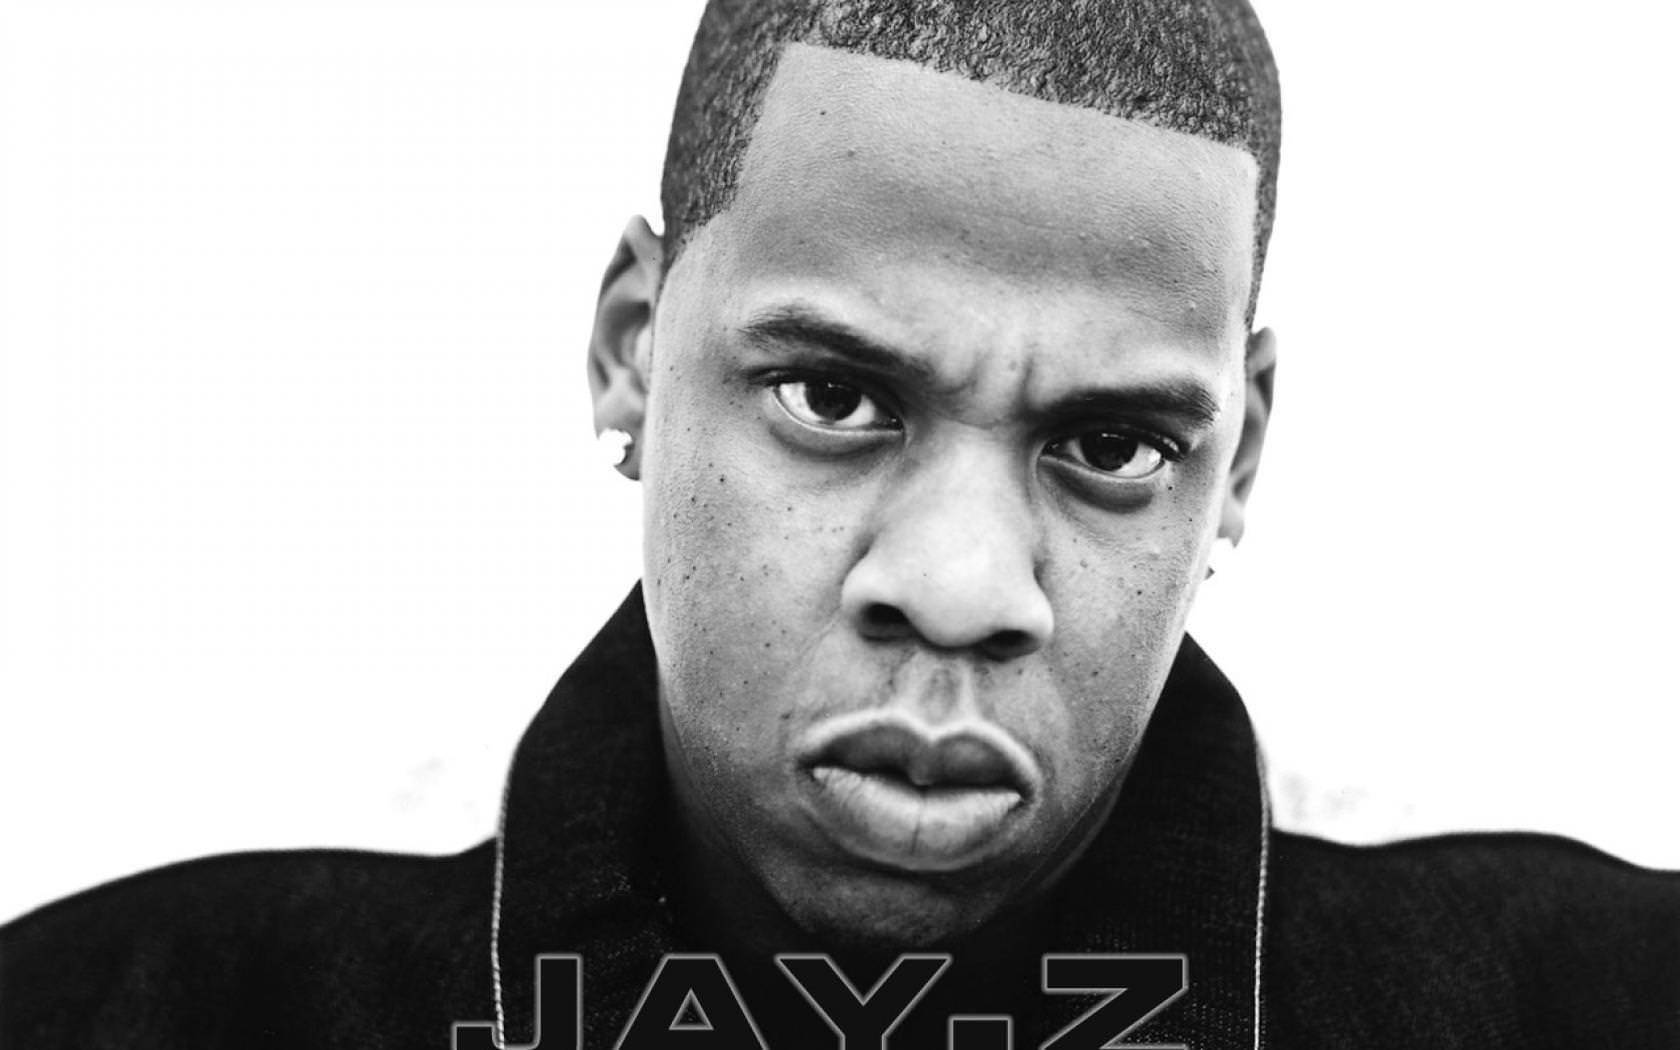 Jay-z Serious Expression Wallpaper